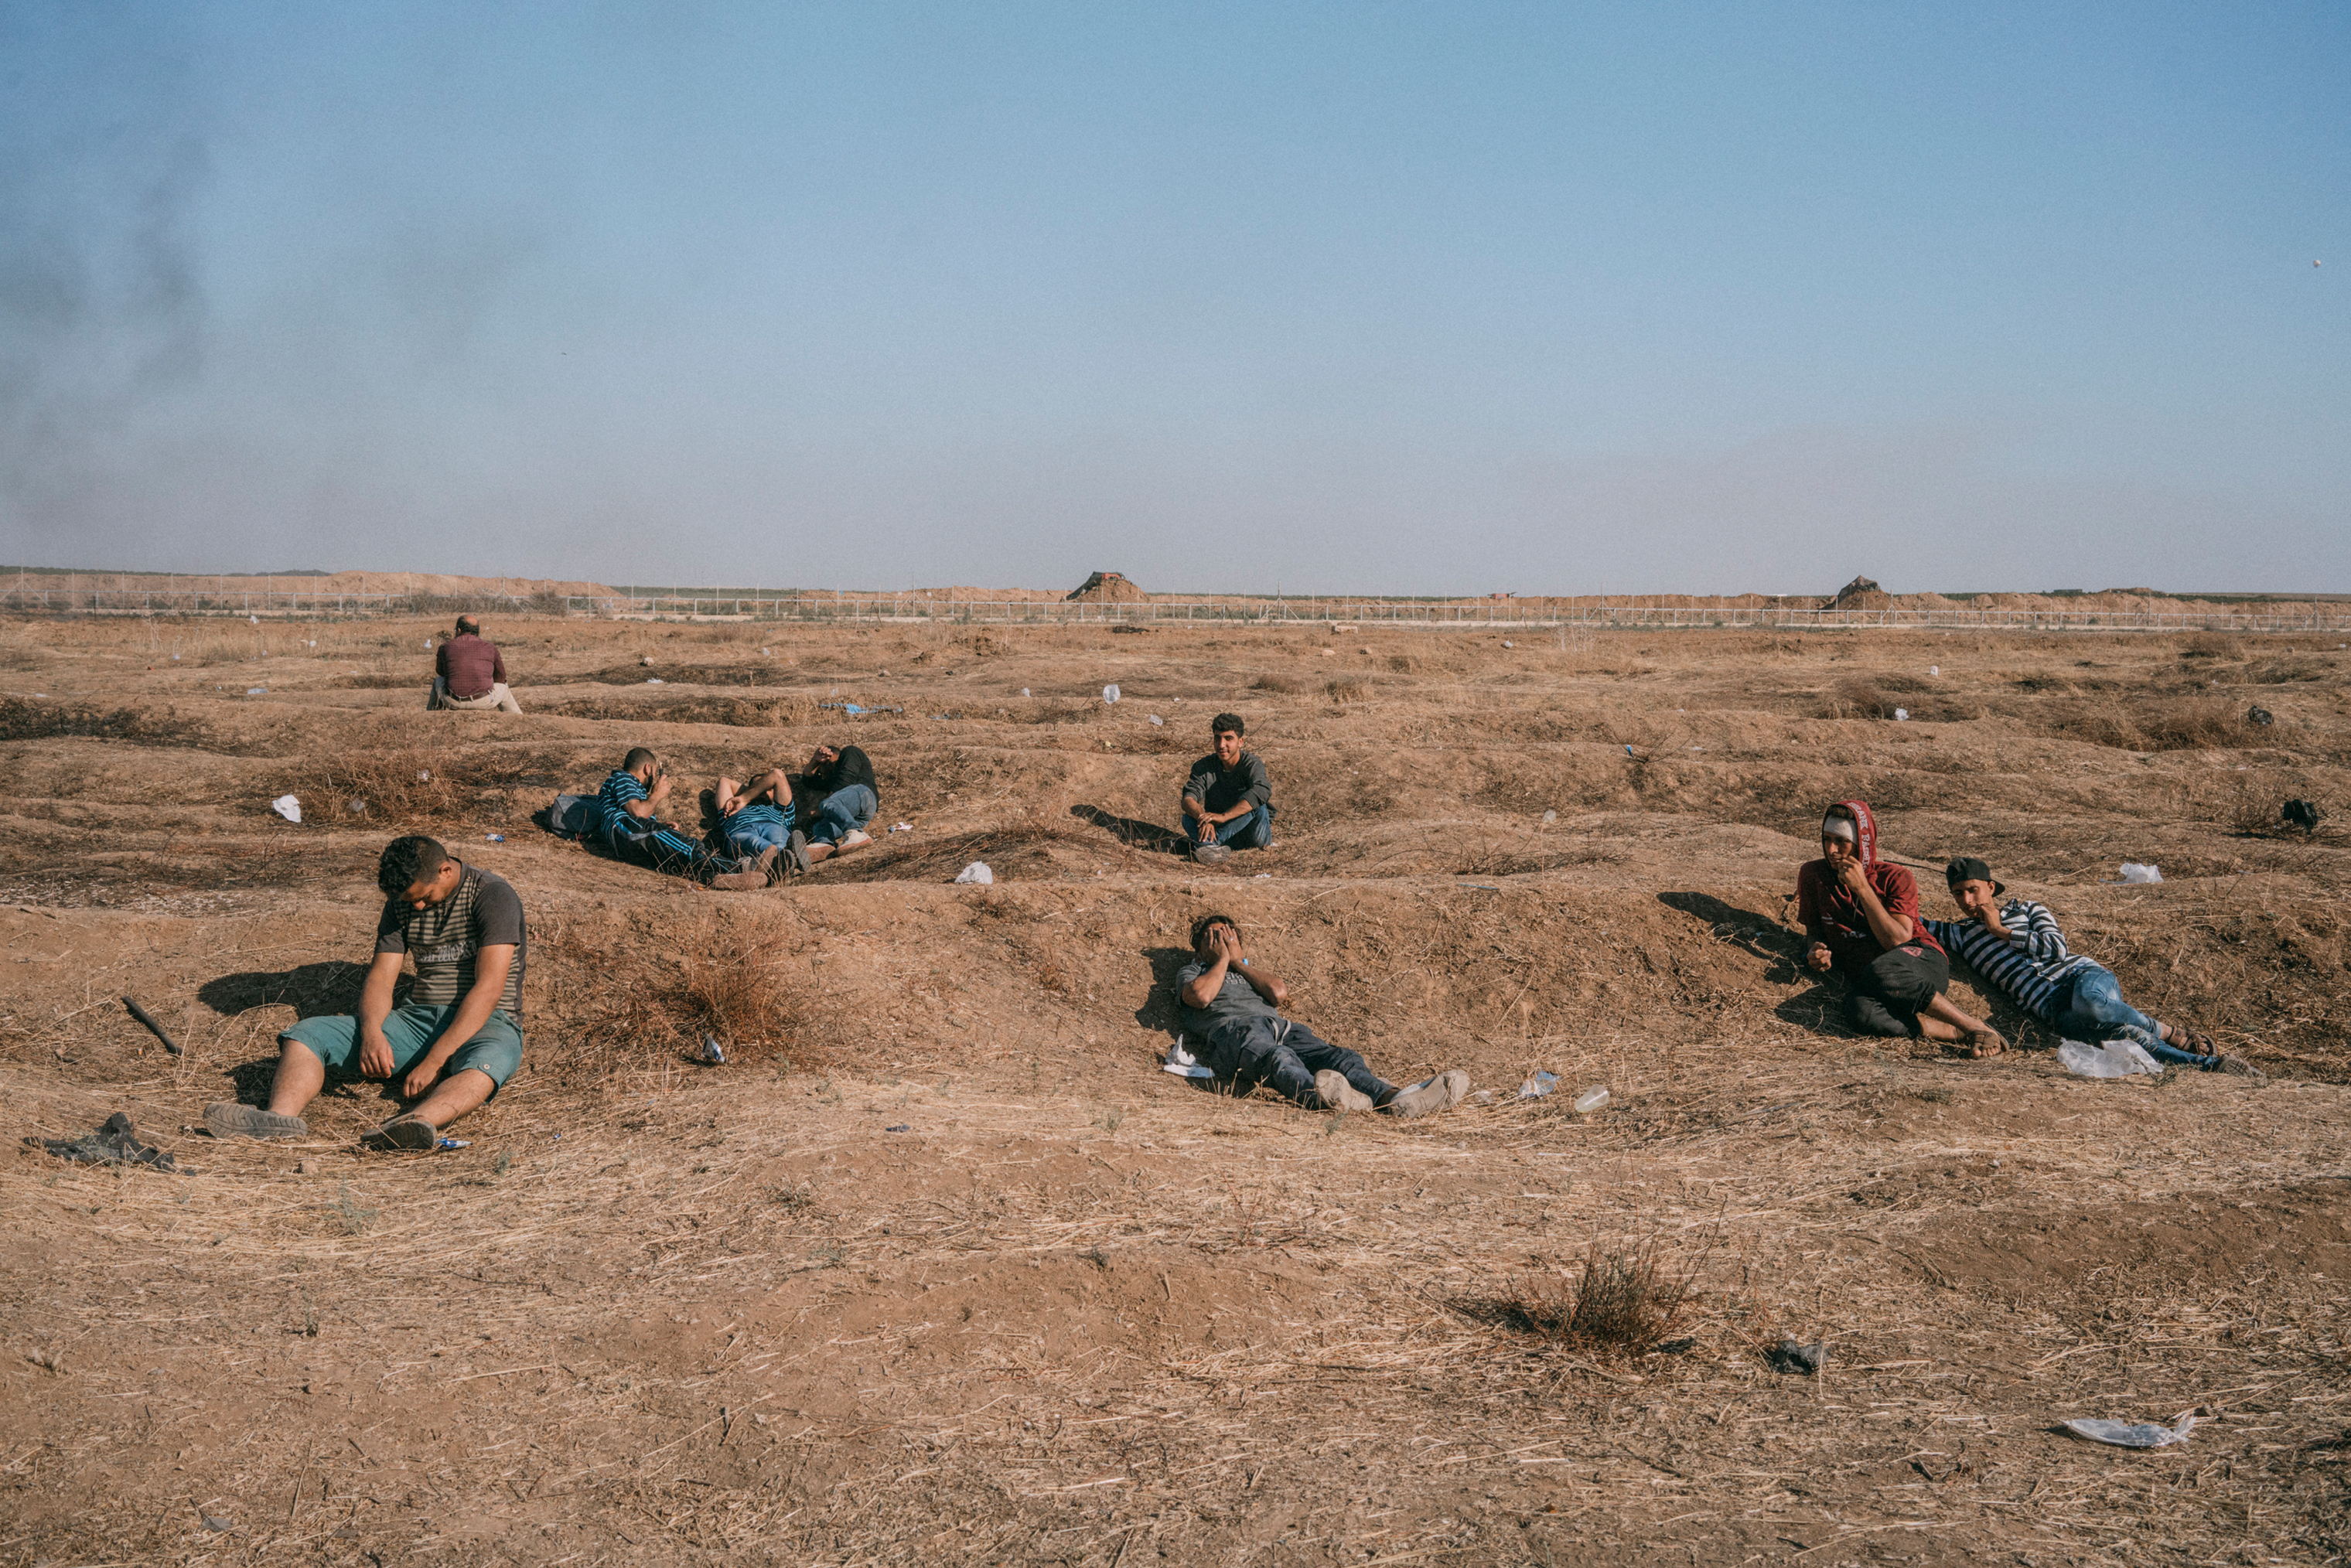 Palestinians sit along the Gaza-Israel border as smoke wafts in the distance. (Emanuele Satolli for TIME)